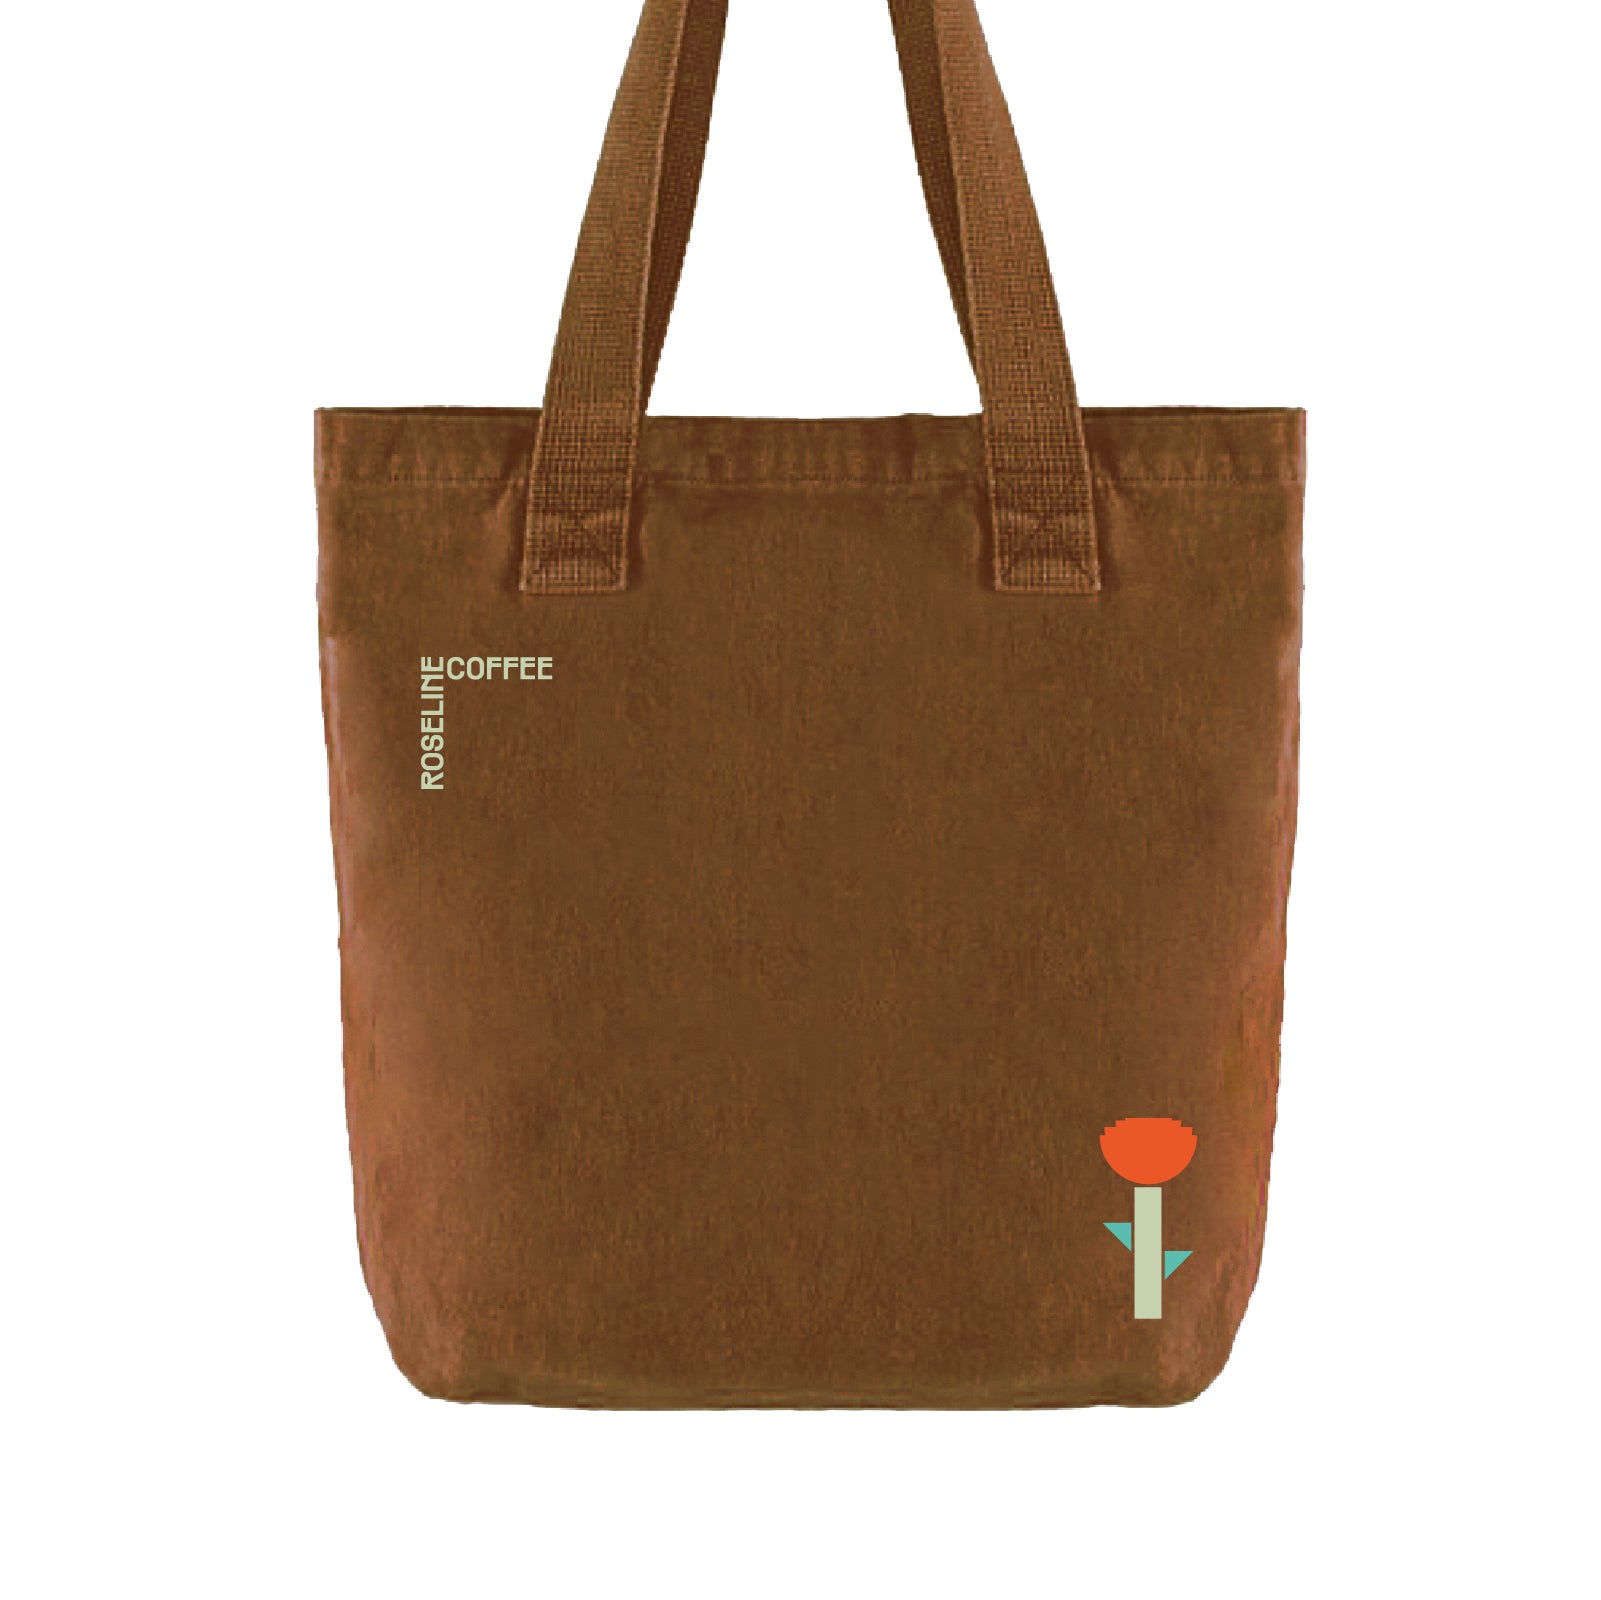 Wild Ginger Tote